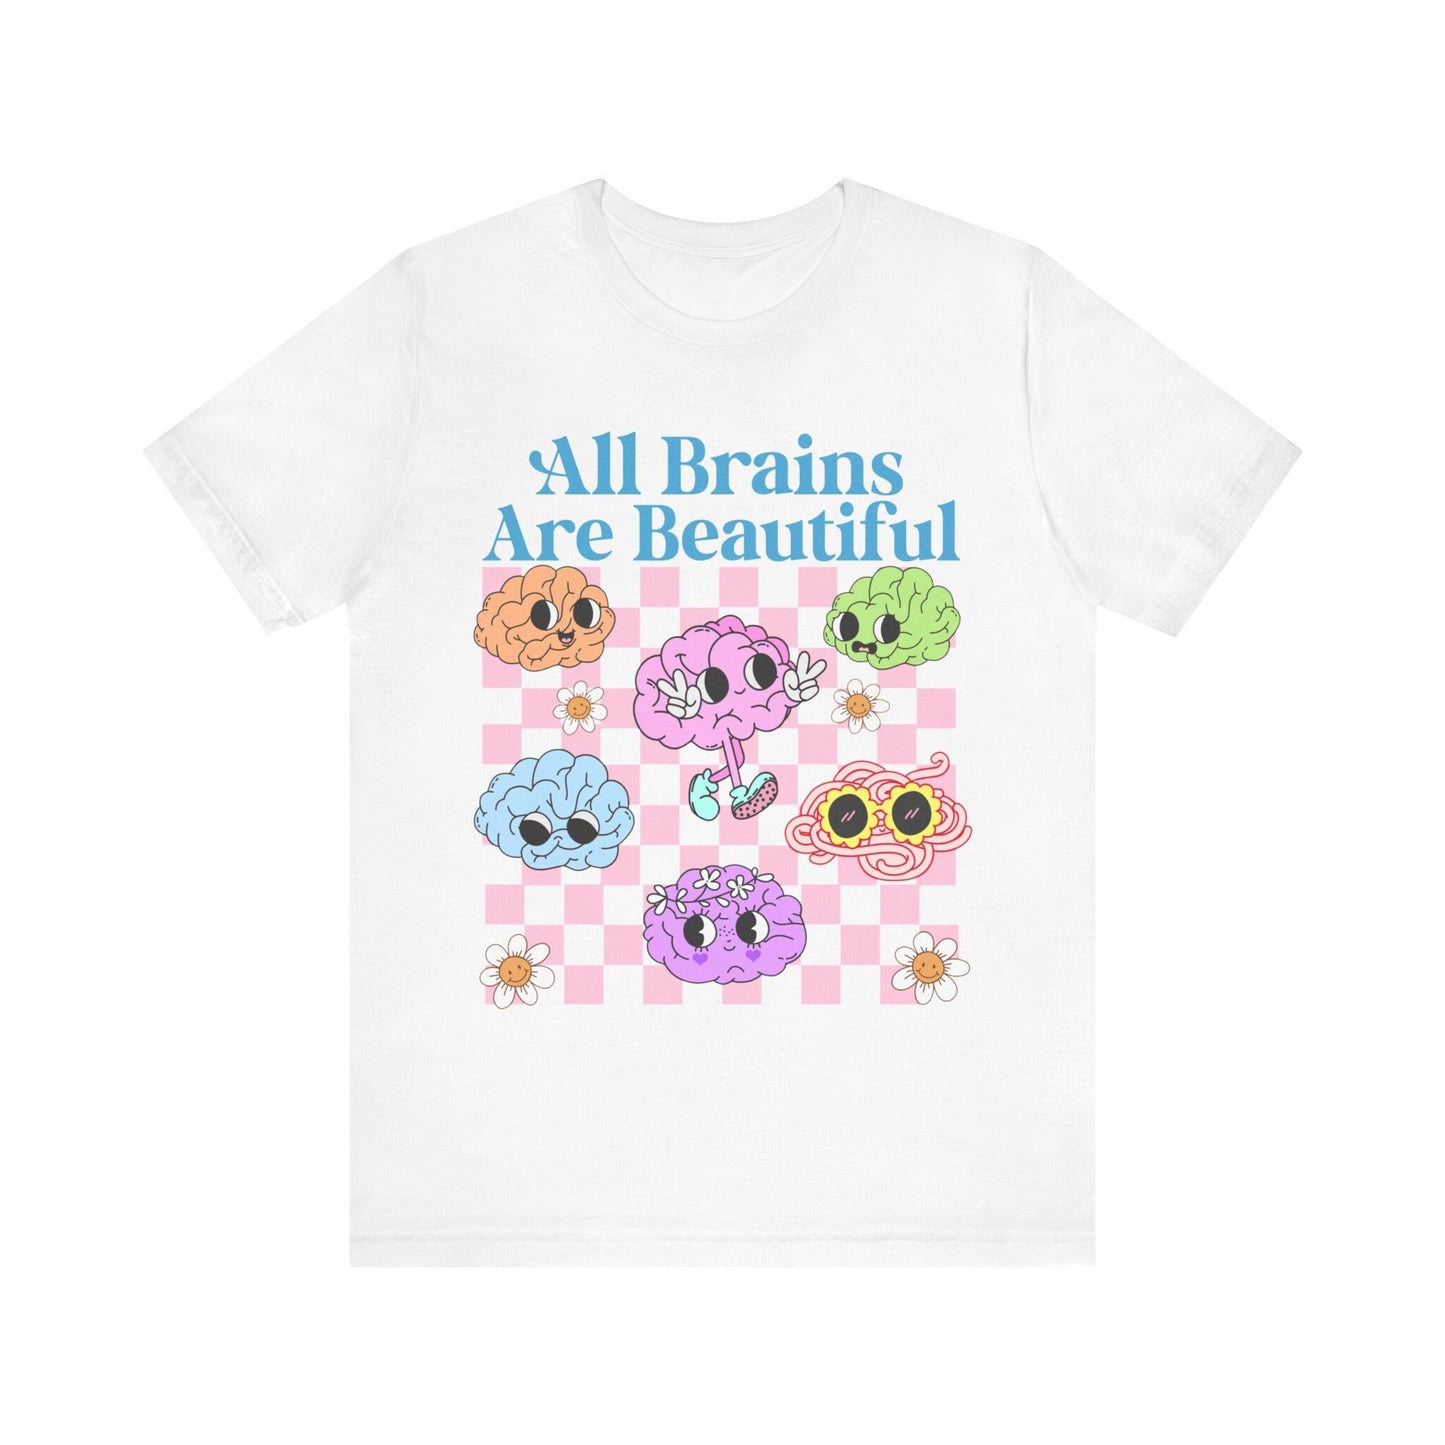 All brains are beautiful